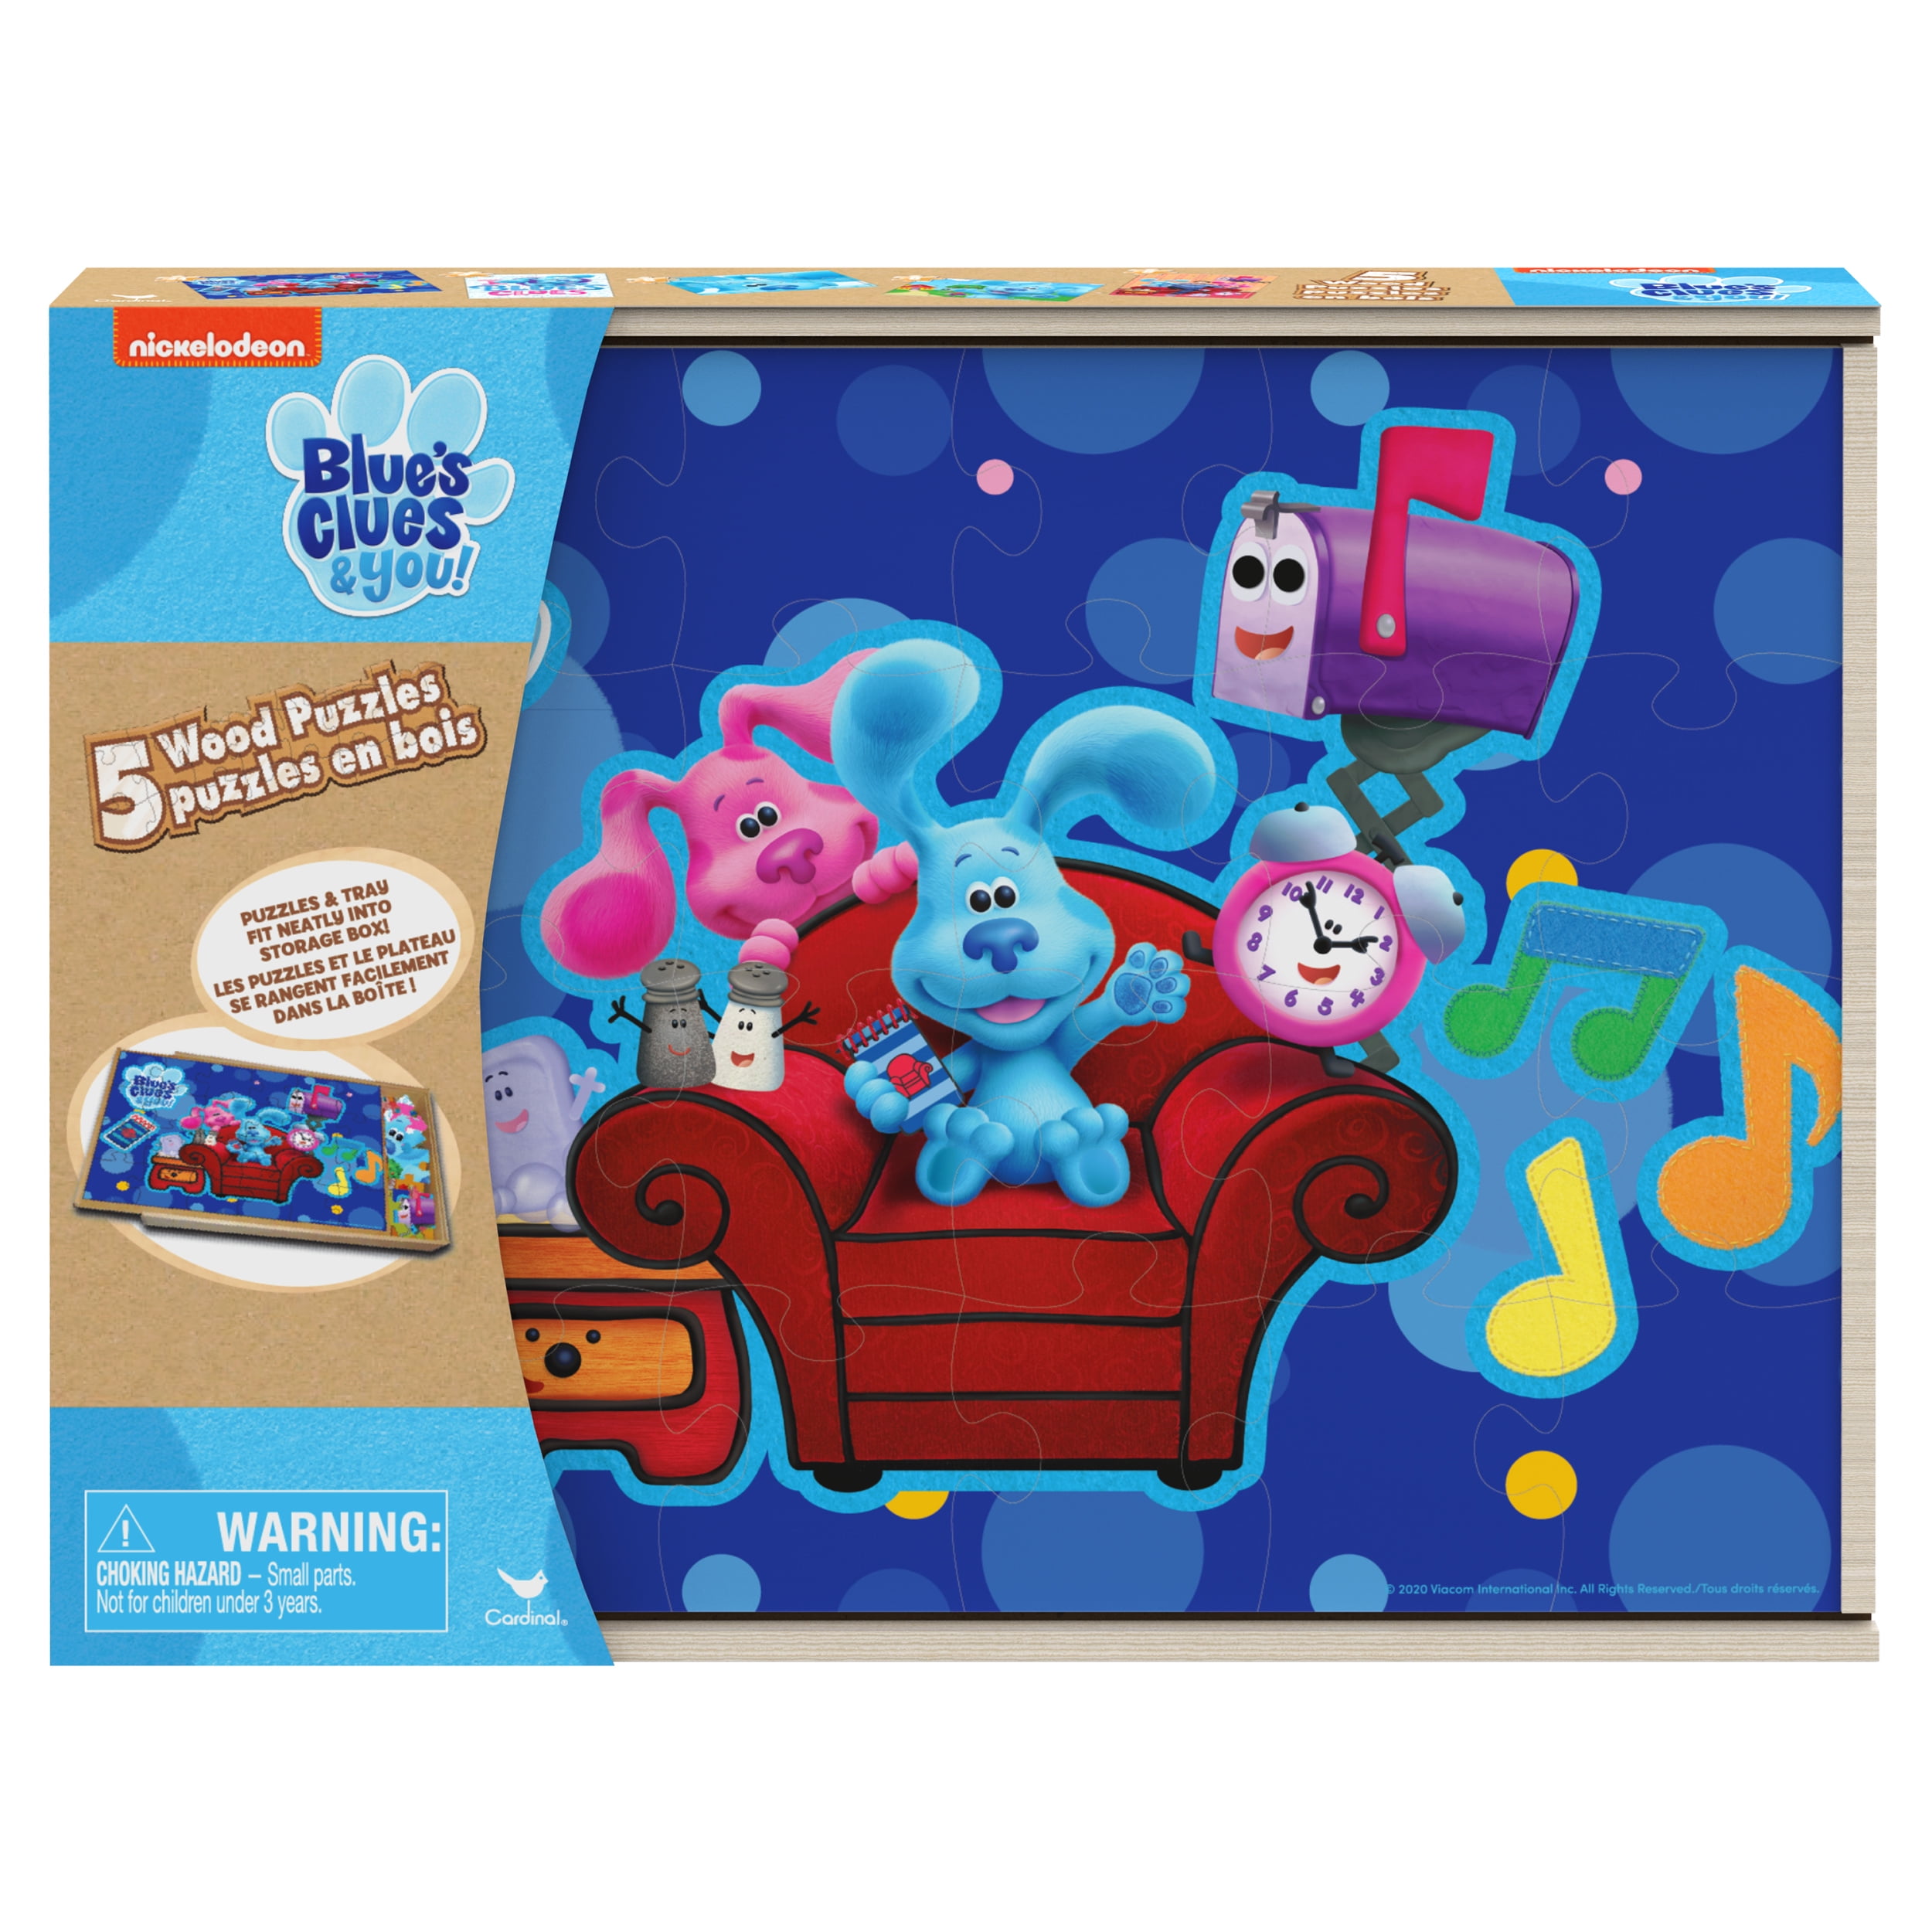 Nickelodeon Blue's Clues 5 Pack Wooden Puzzles with Storage Box 